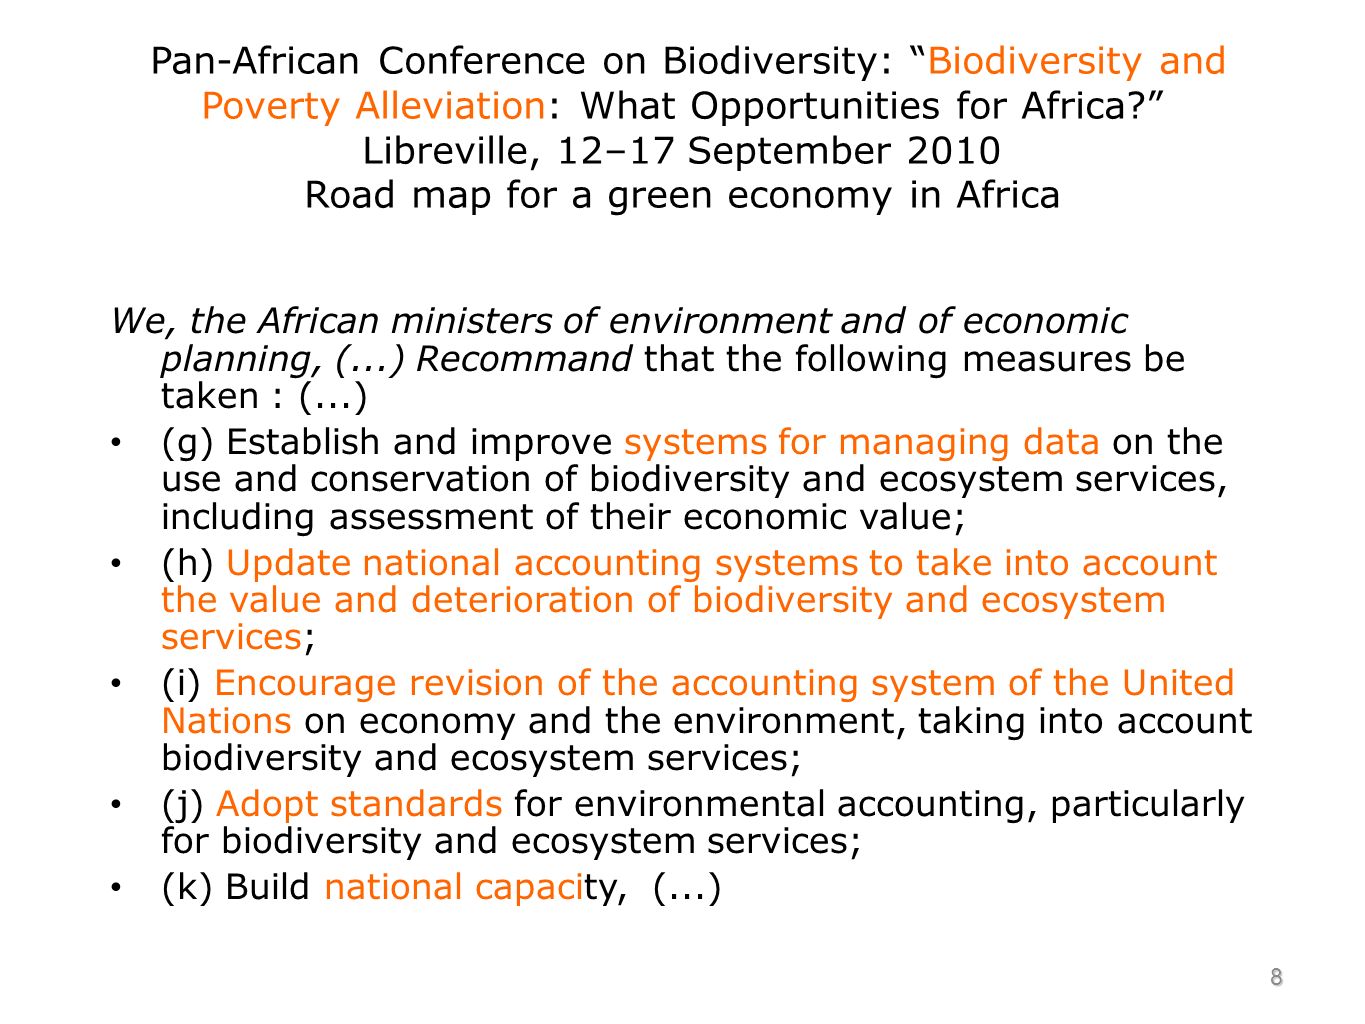 Pan-African Conference on Biodiversity: Biodiversity and Poverty Alleviation: What Opportunities for Africa.